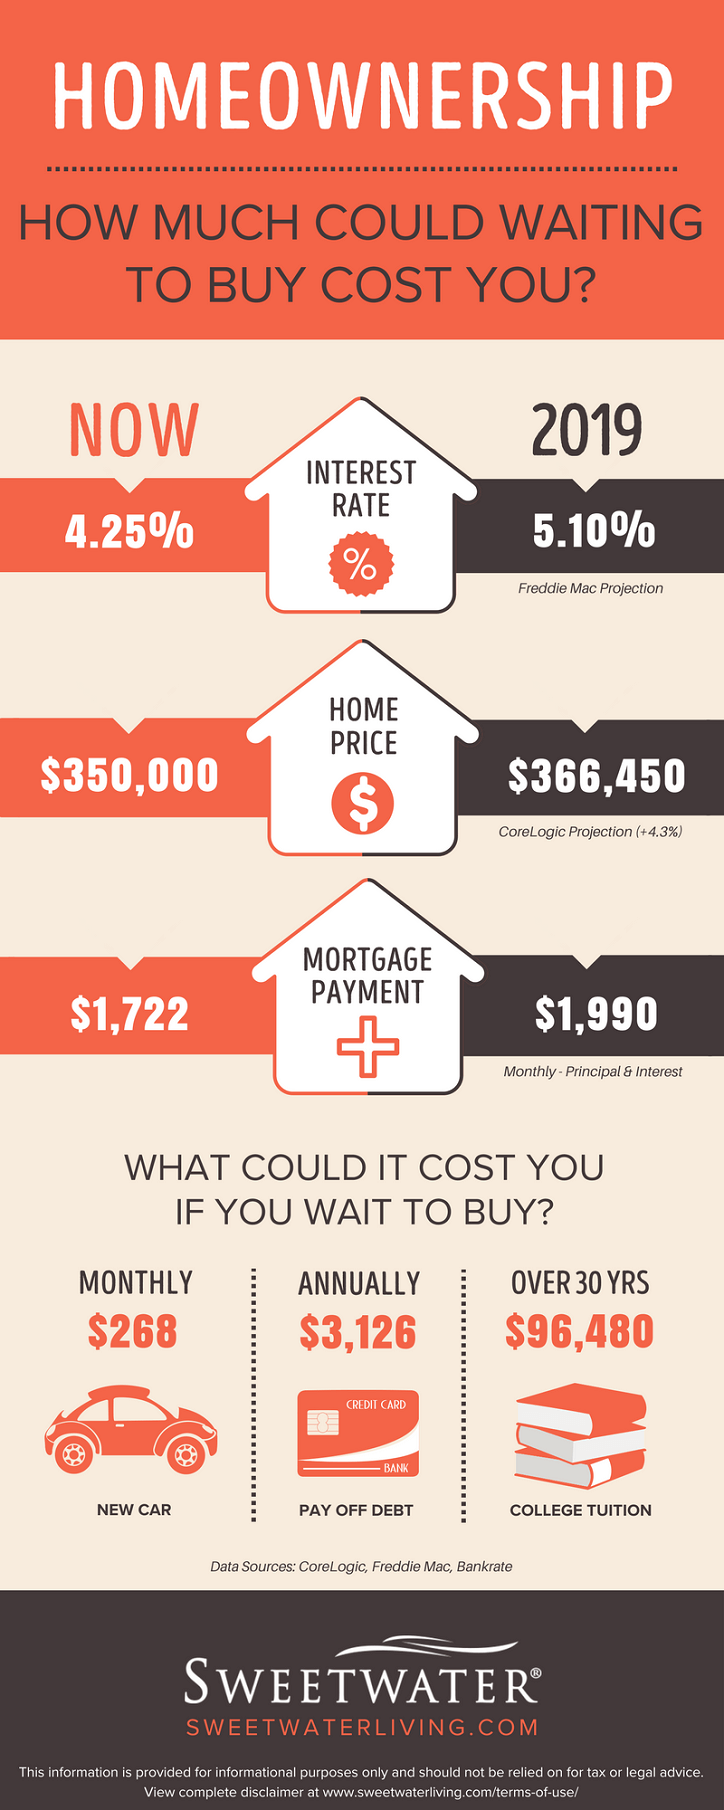 Infographic: What is the cost to wait in buying a new home